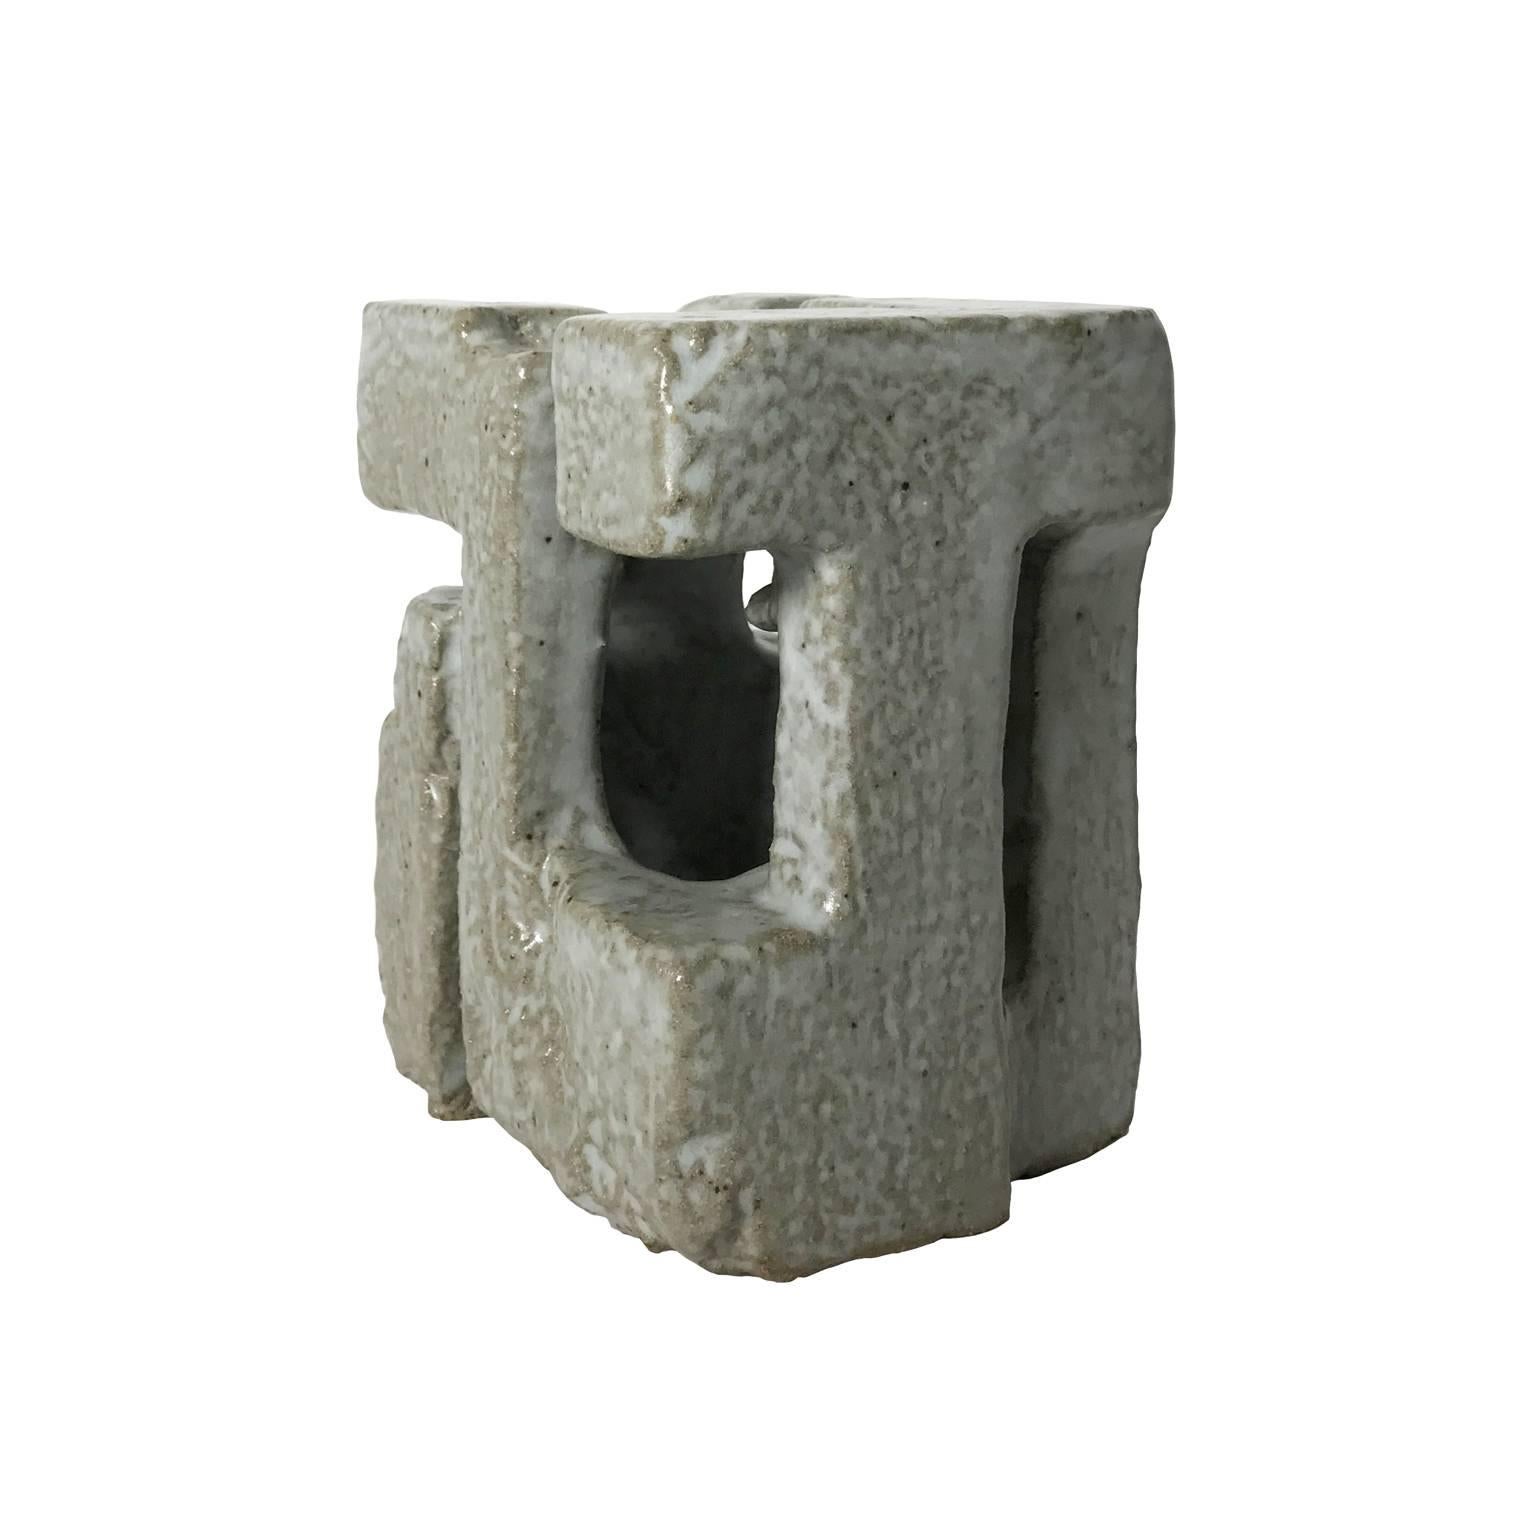 Small 1960's abstract pottery sculpture with grey glaze by Corrine Peterson.